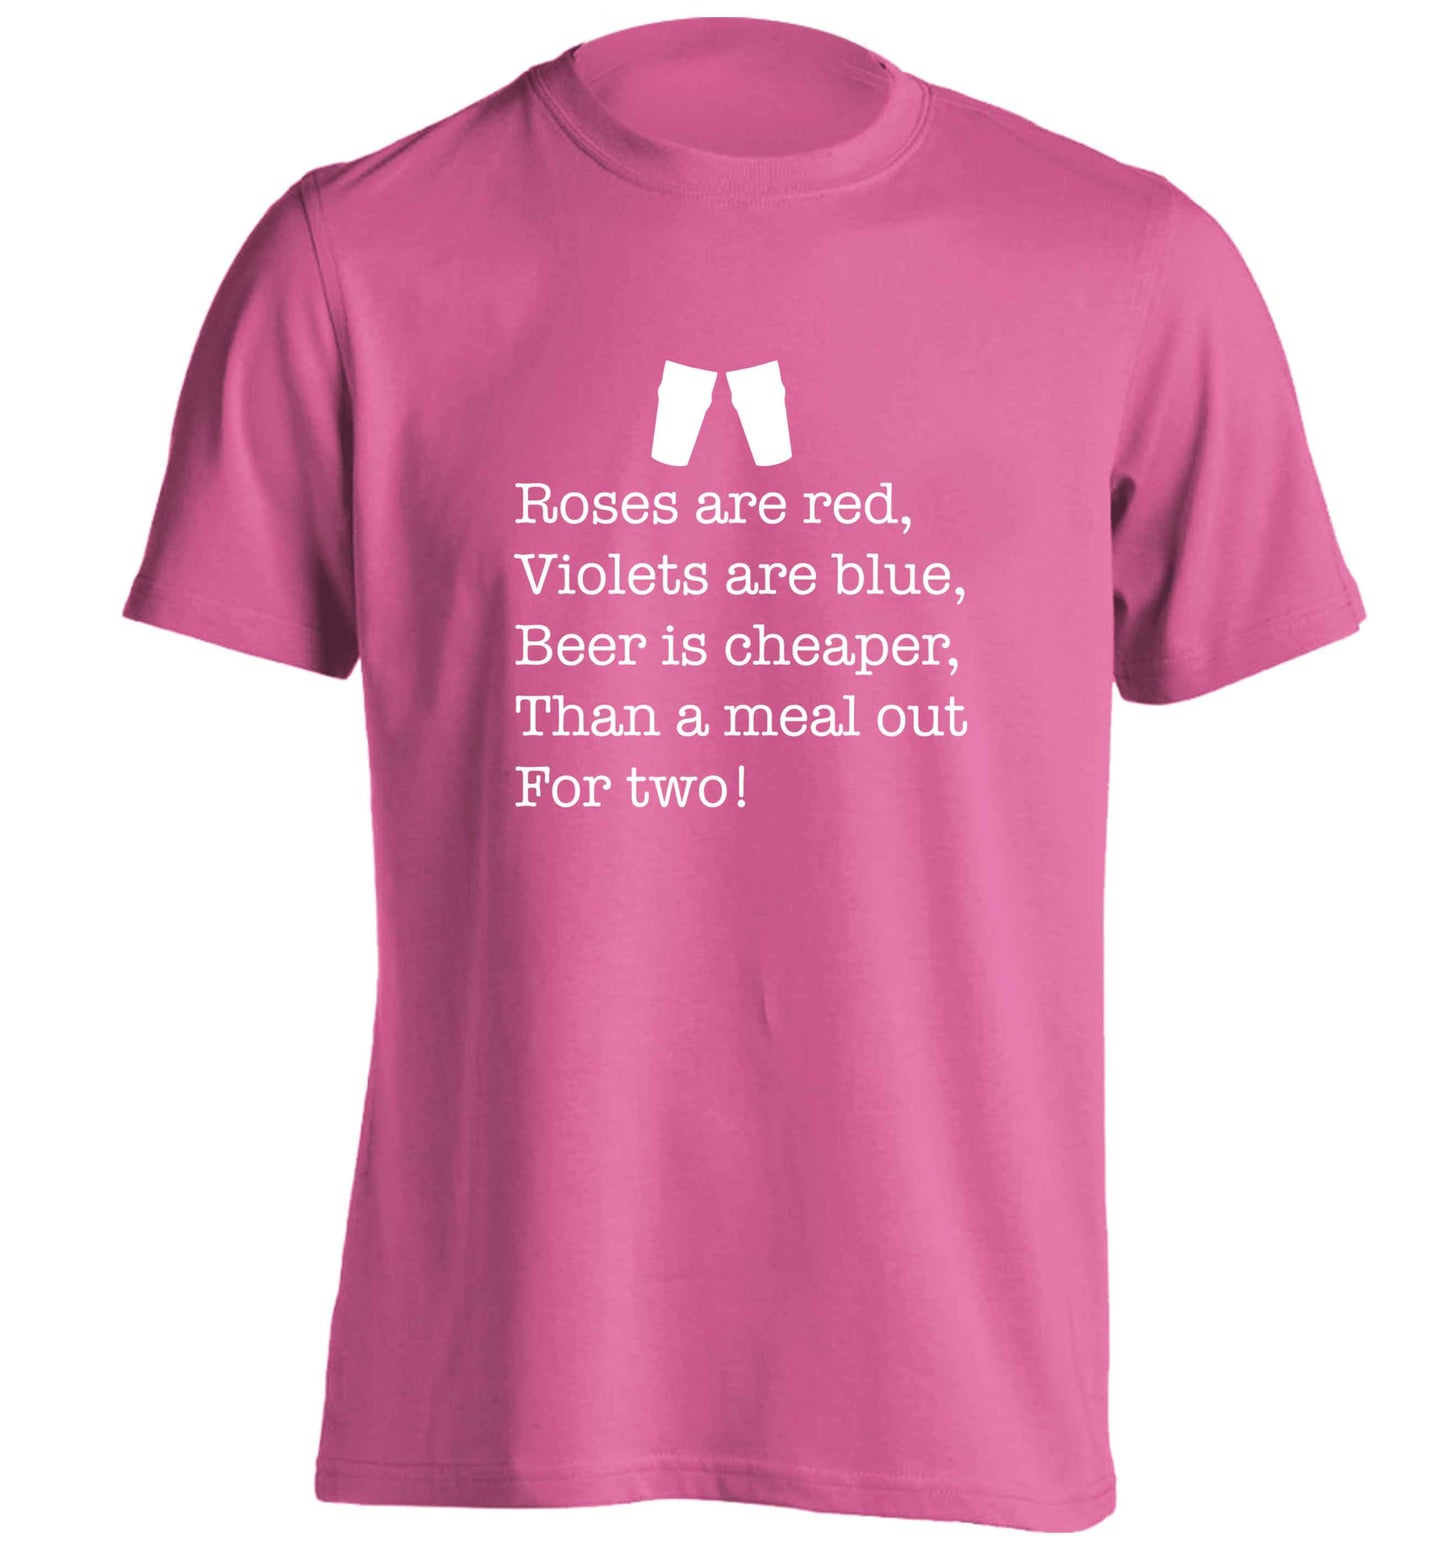 Roses are red violets are blue beer is cheaper than a meal out for two adults unisex pink Tshirt 2XL